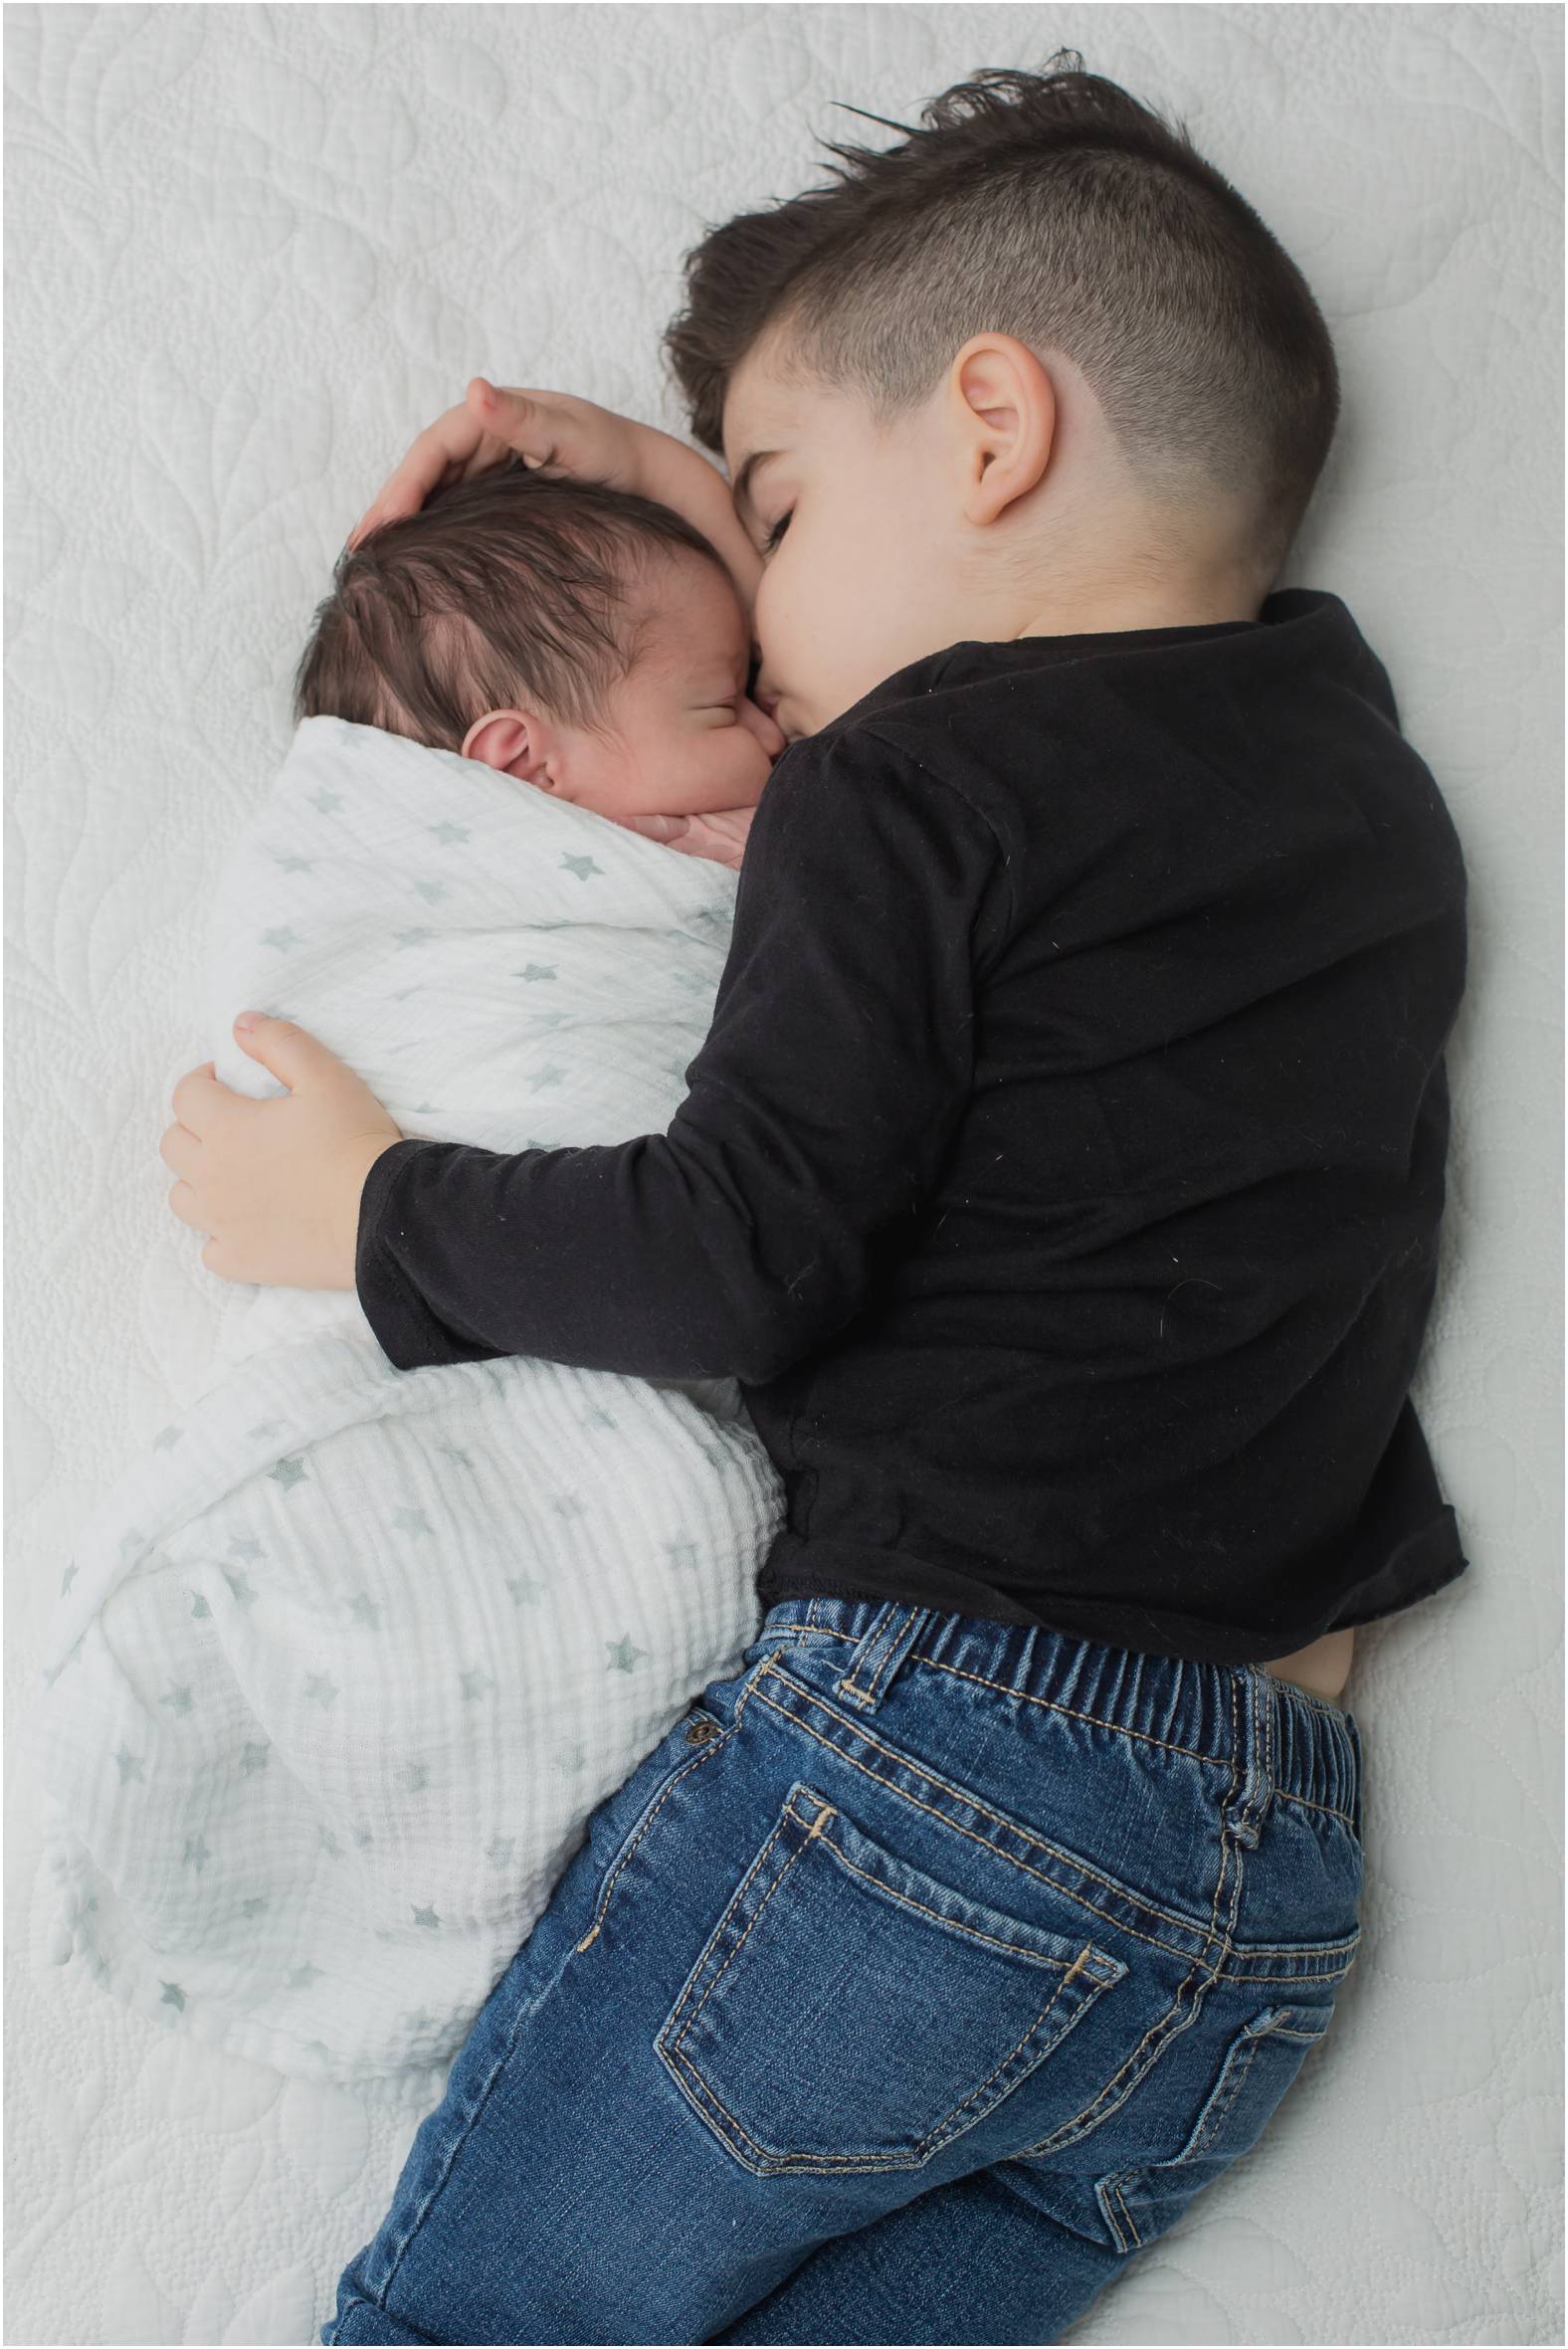 Toddler lies on bed and snuggles his newborn baby boy in neutral swaddle during lifestyle newborn session.